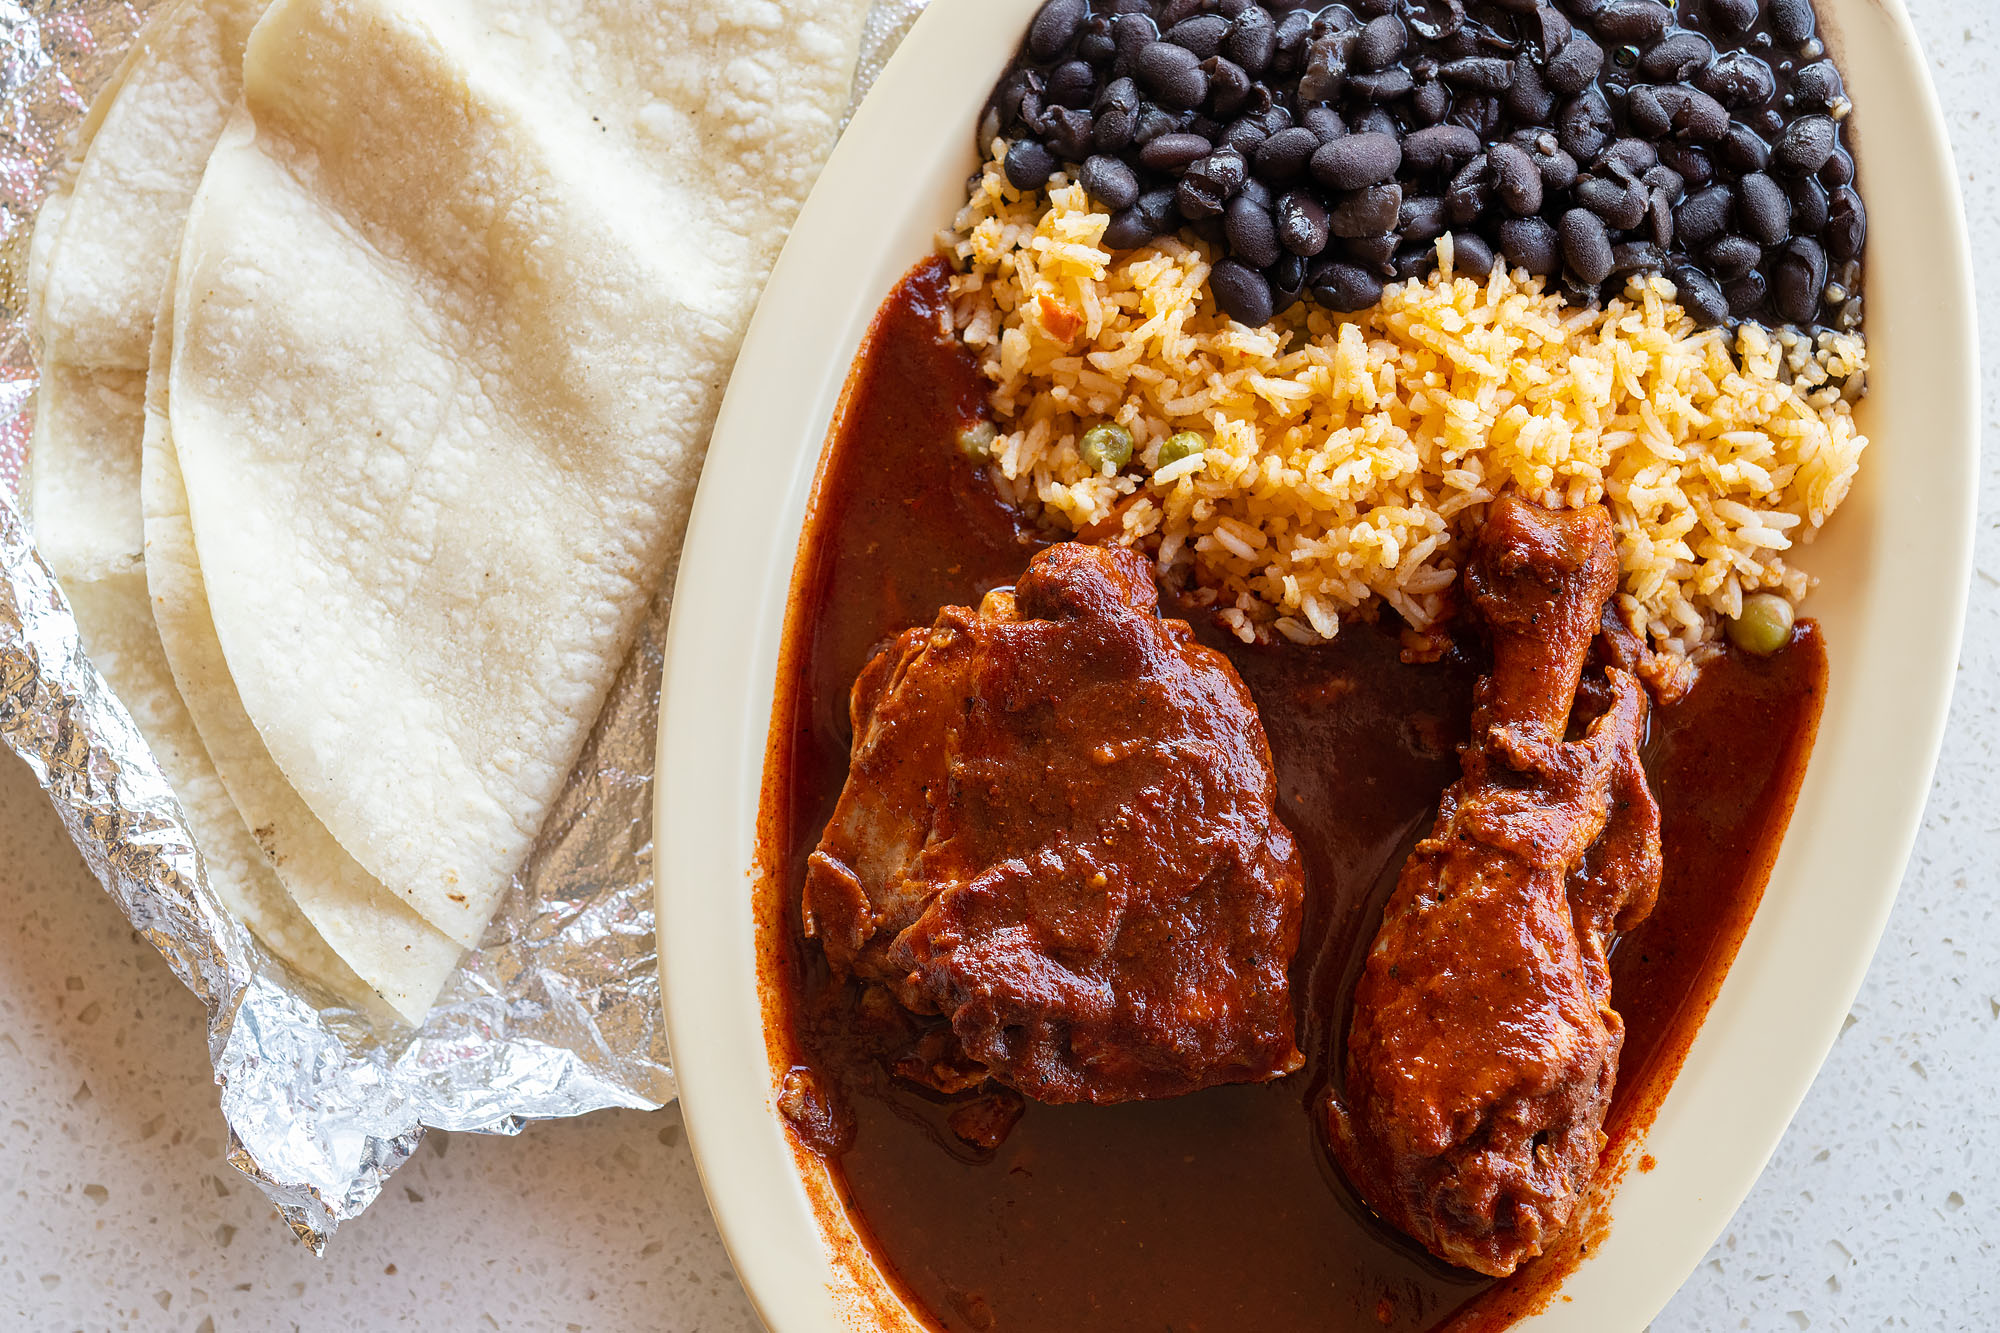 Reddish chicken dish with rice, beans, and tortillas.